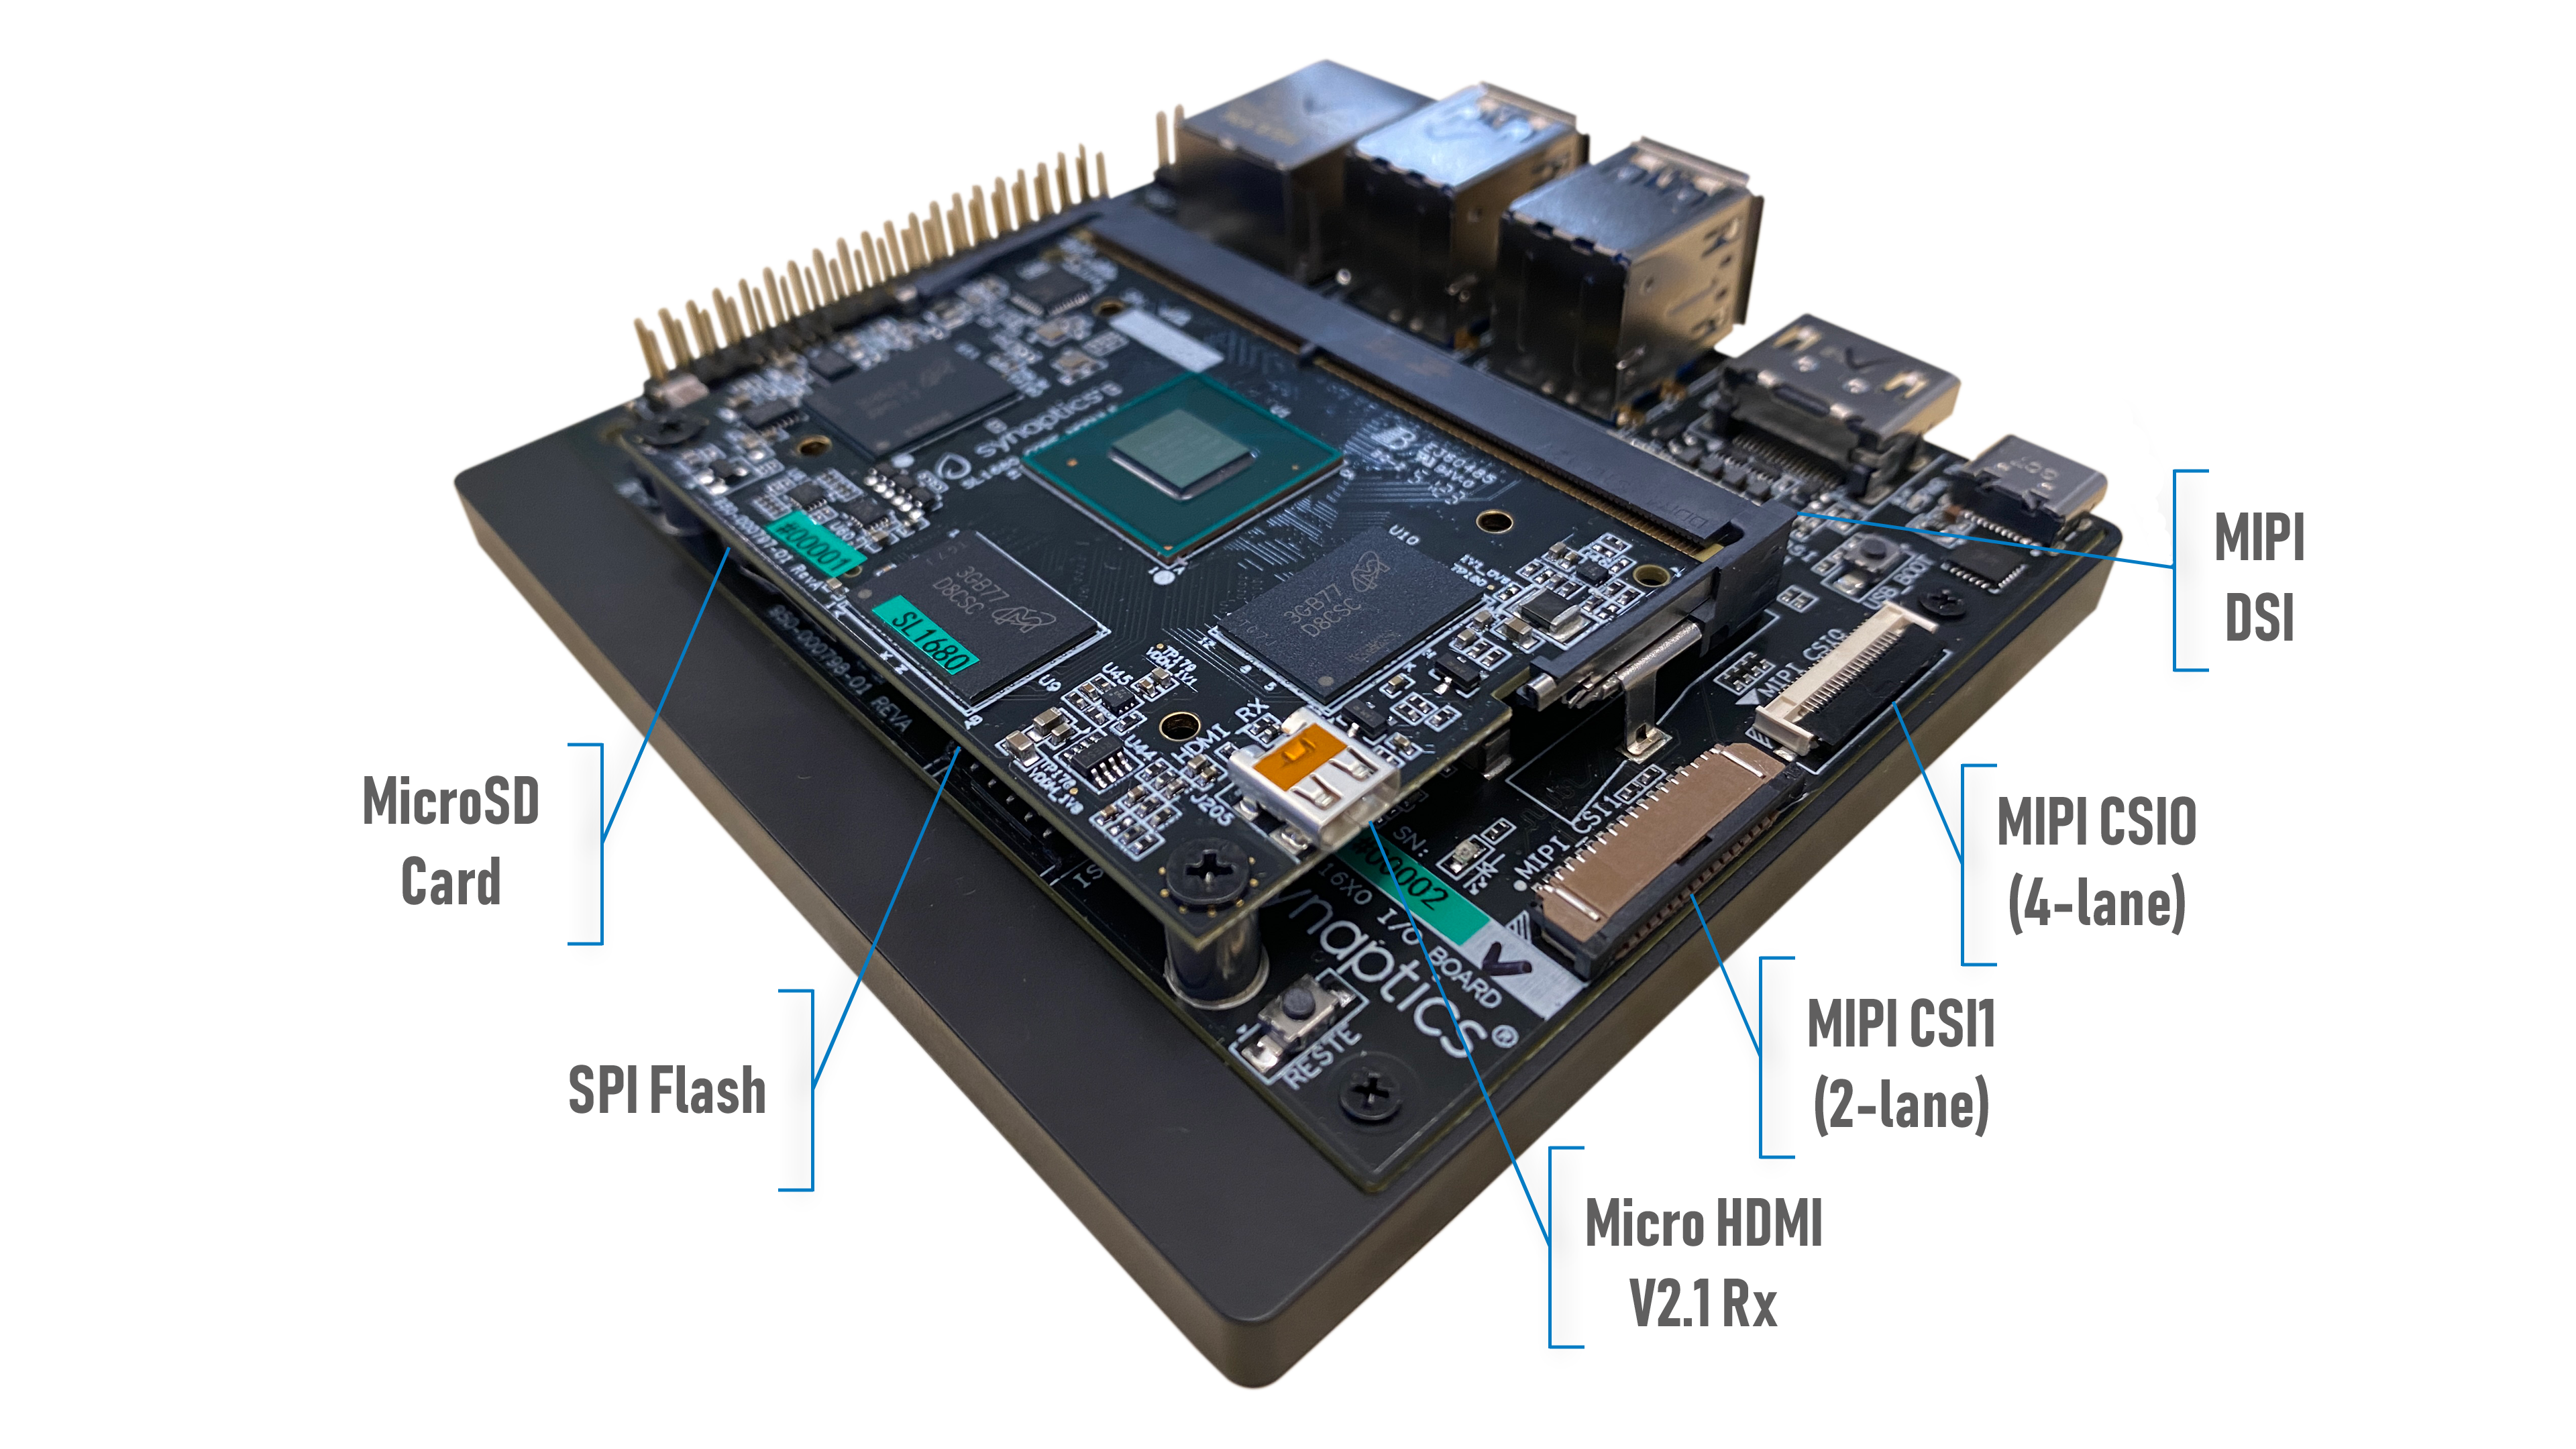 Astra foundation series rear board showing highlights